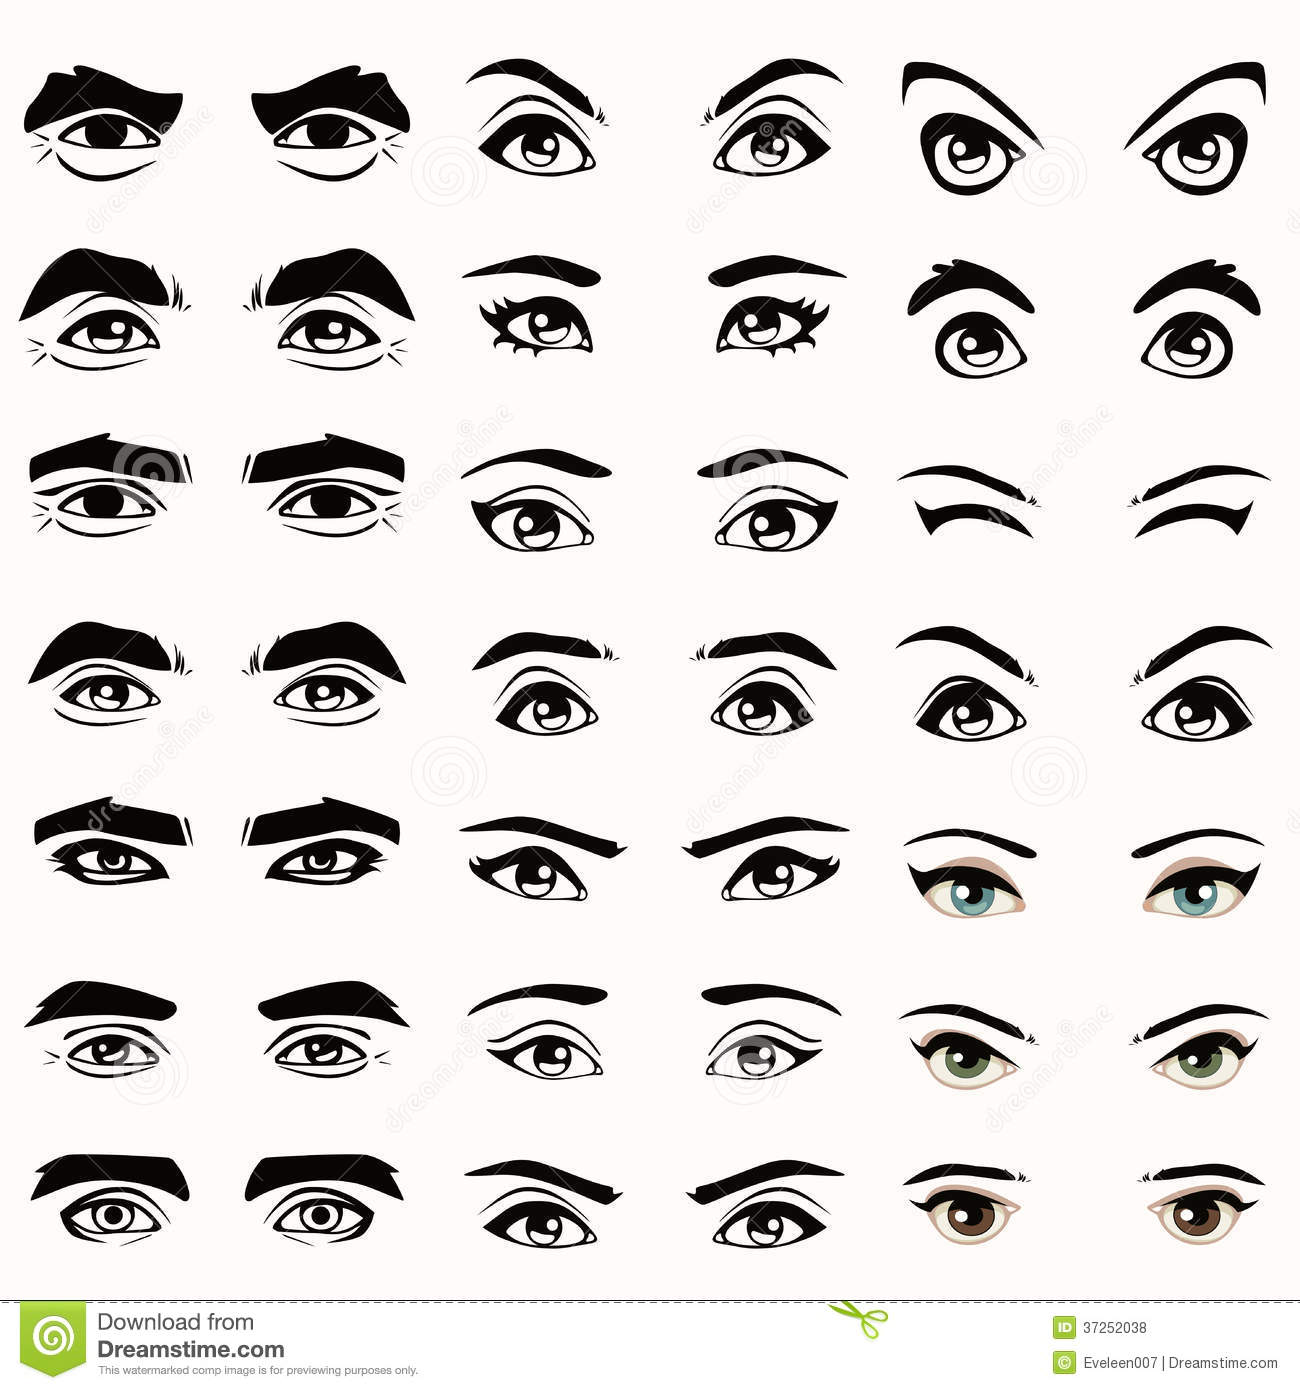 Eyes And Eyebrows Silhouette Royalty Free Stock Photos   Image    